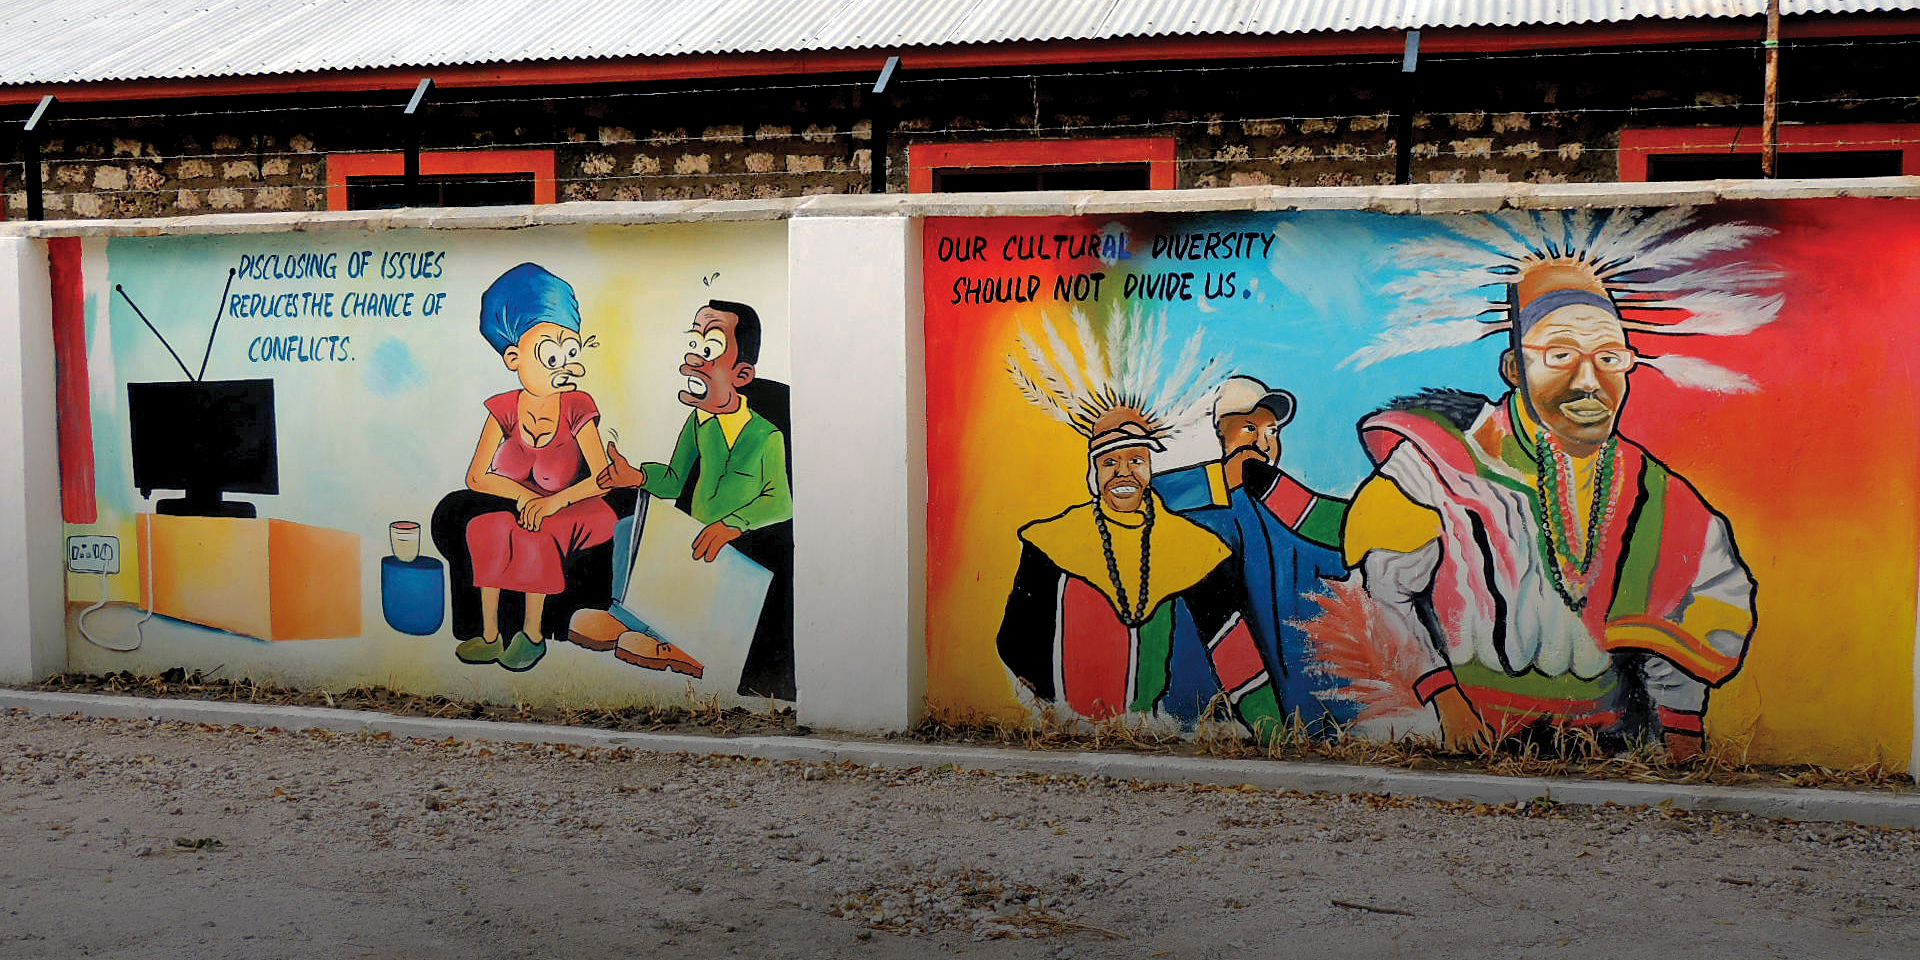 Image of two brightly colored murals side by side on a dividing wall. One addresses conflict resolution while the other celebrates cultural diversity.